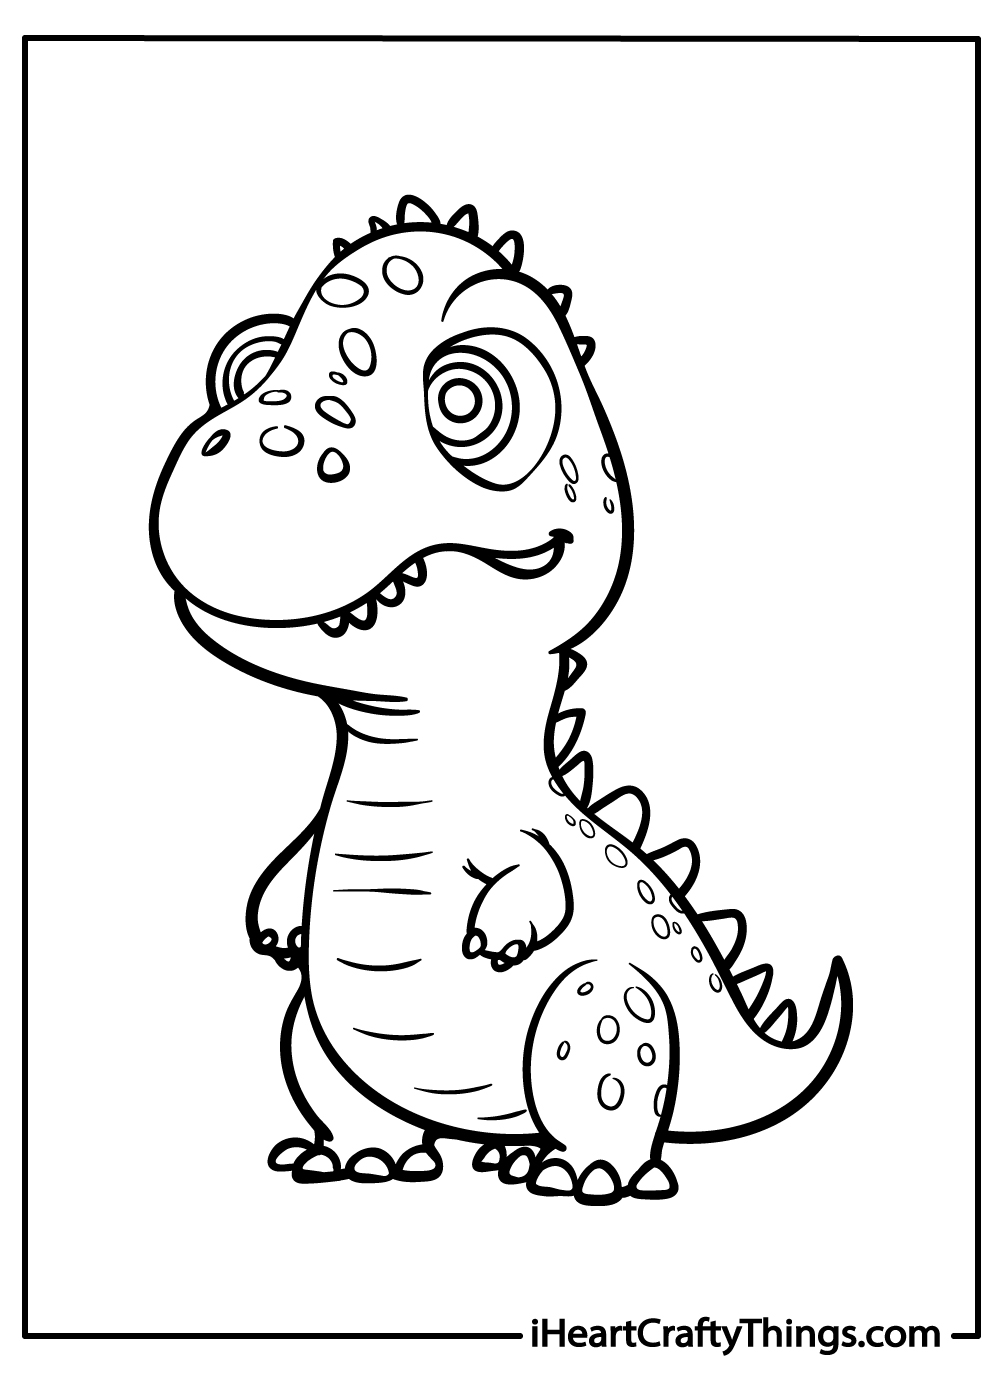 an ugly dinosaur coloring page